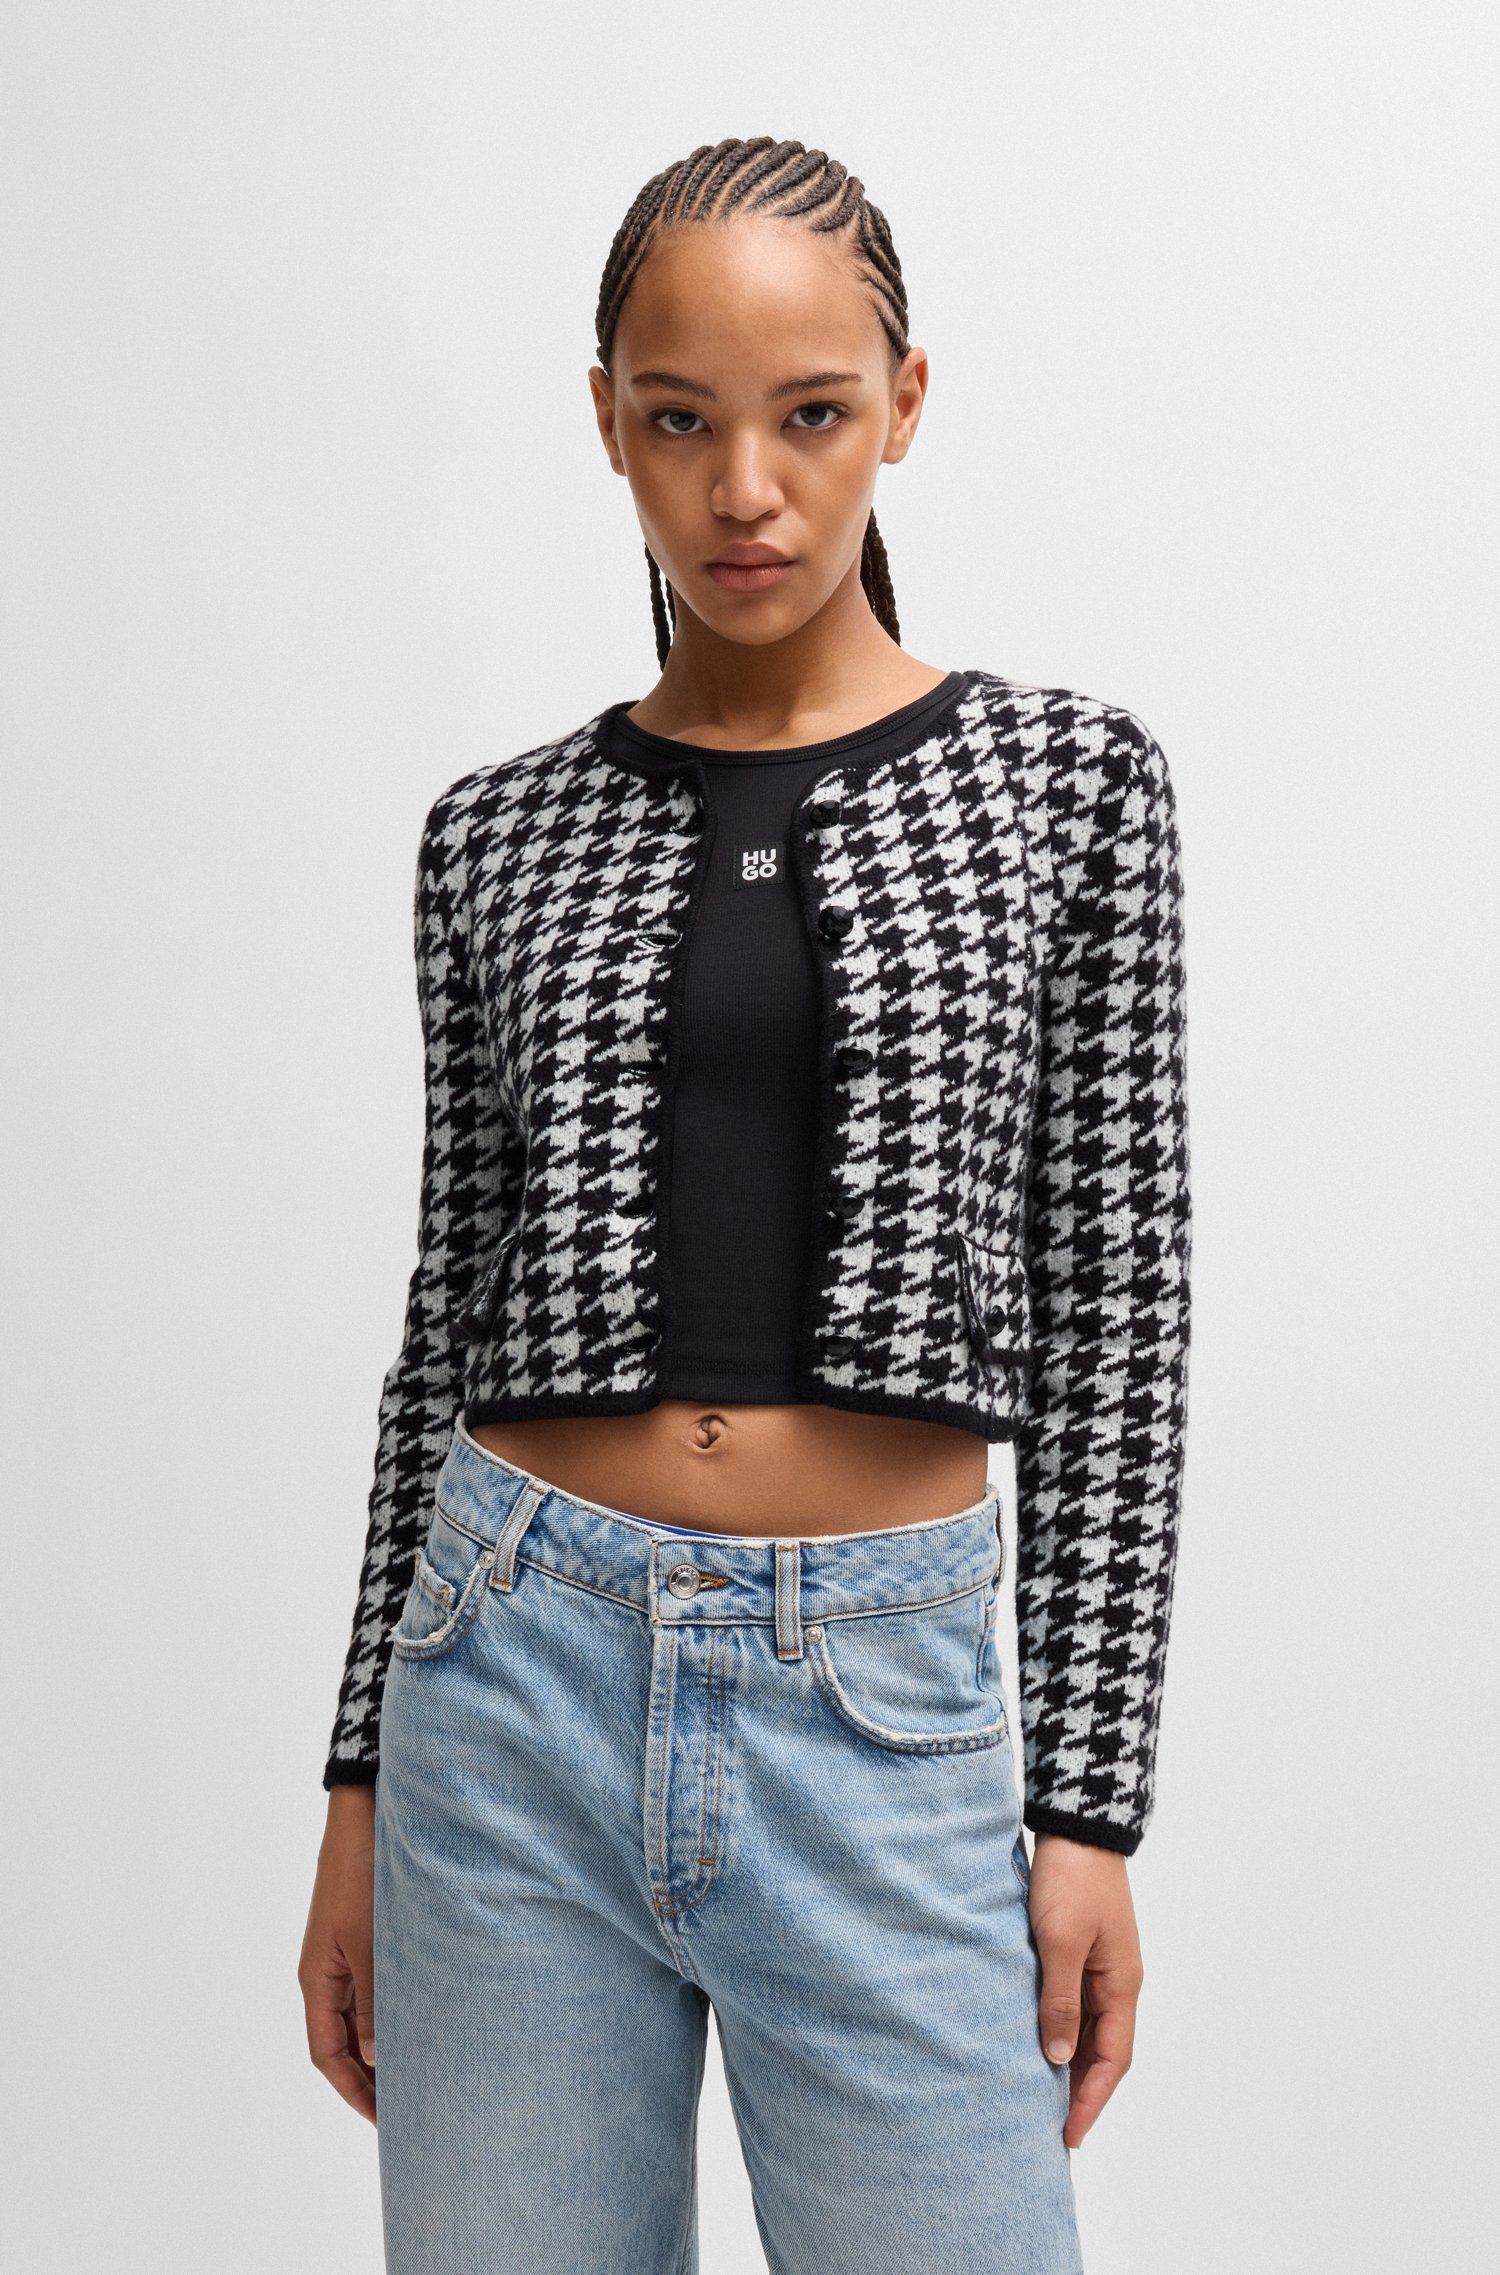 Cropped cardigan a houndstooth cotton blend